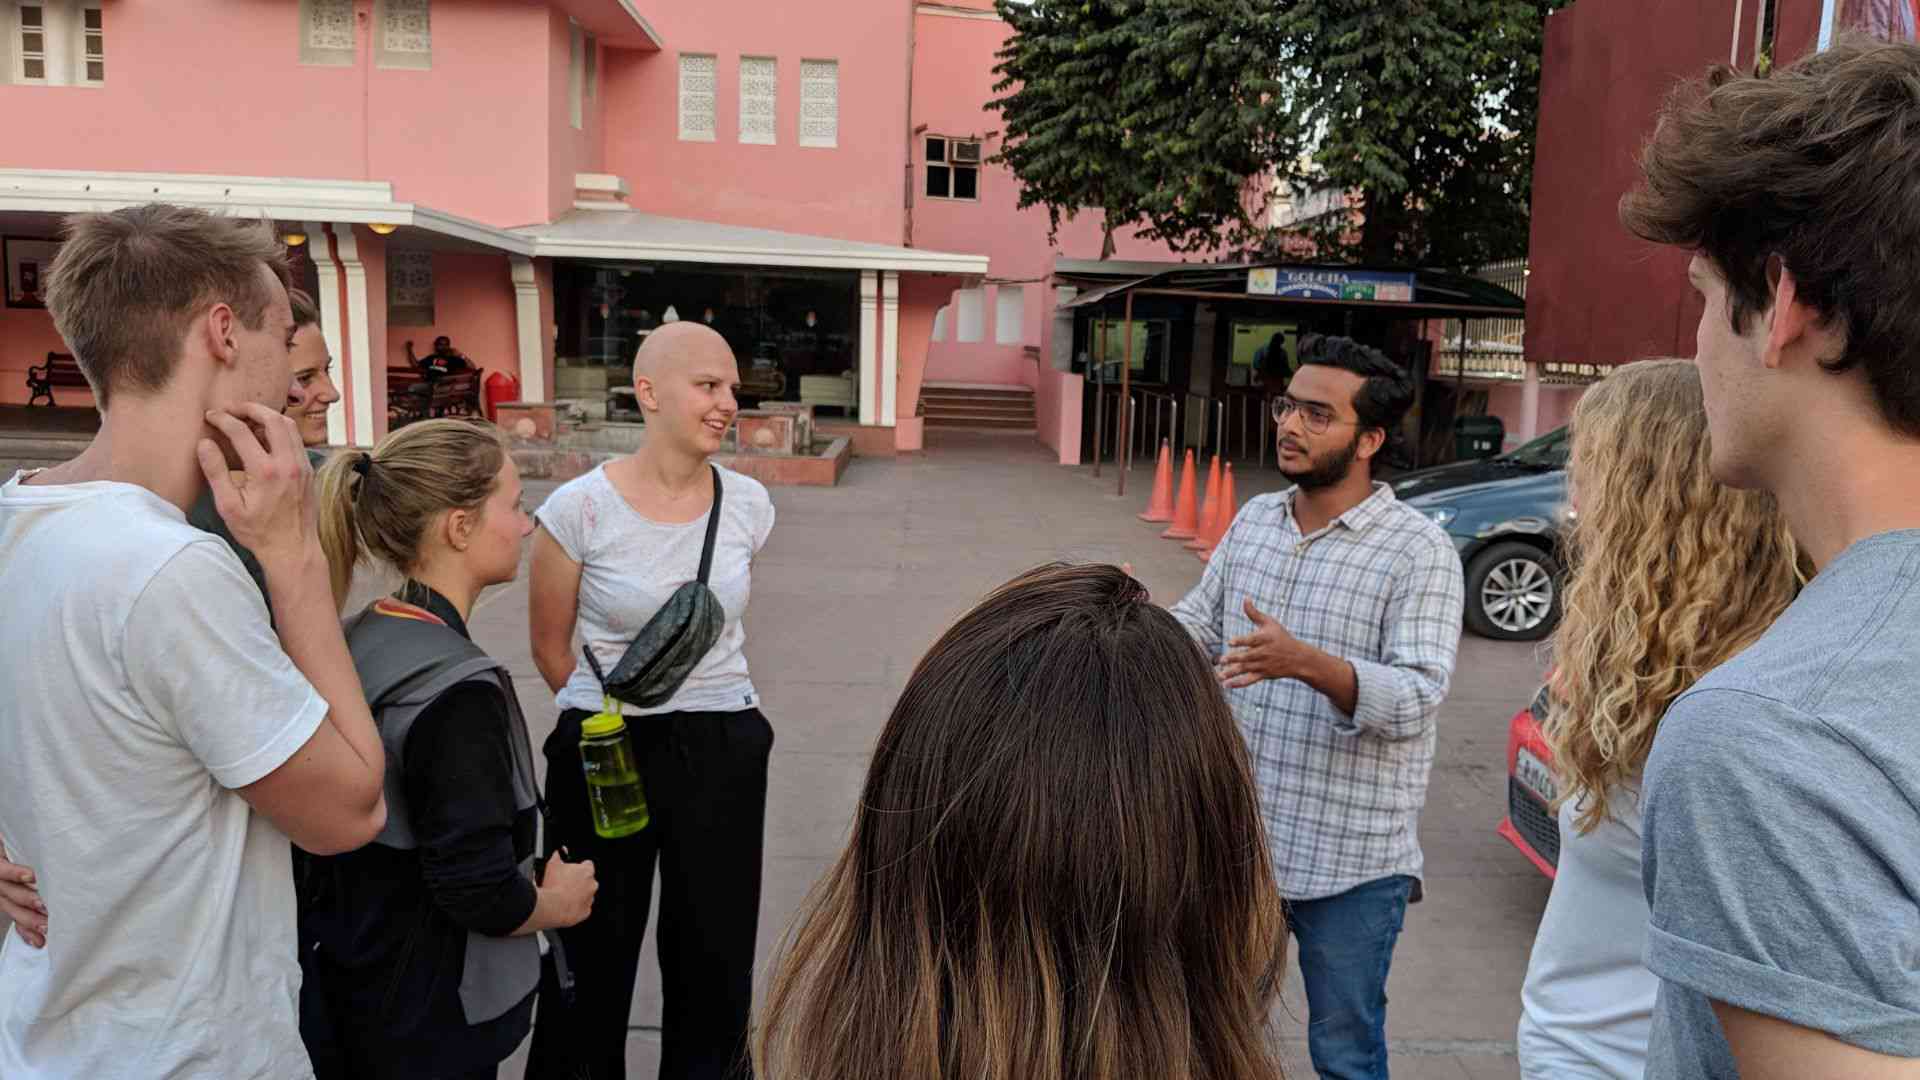 Starting the Jaipur Heritage Tour with the history of the city